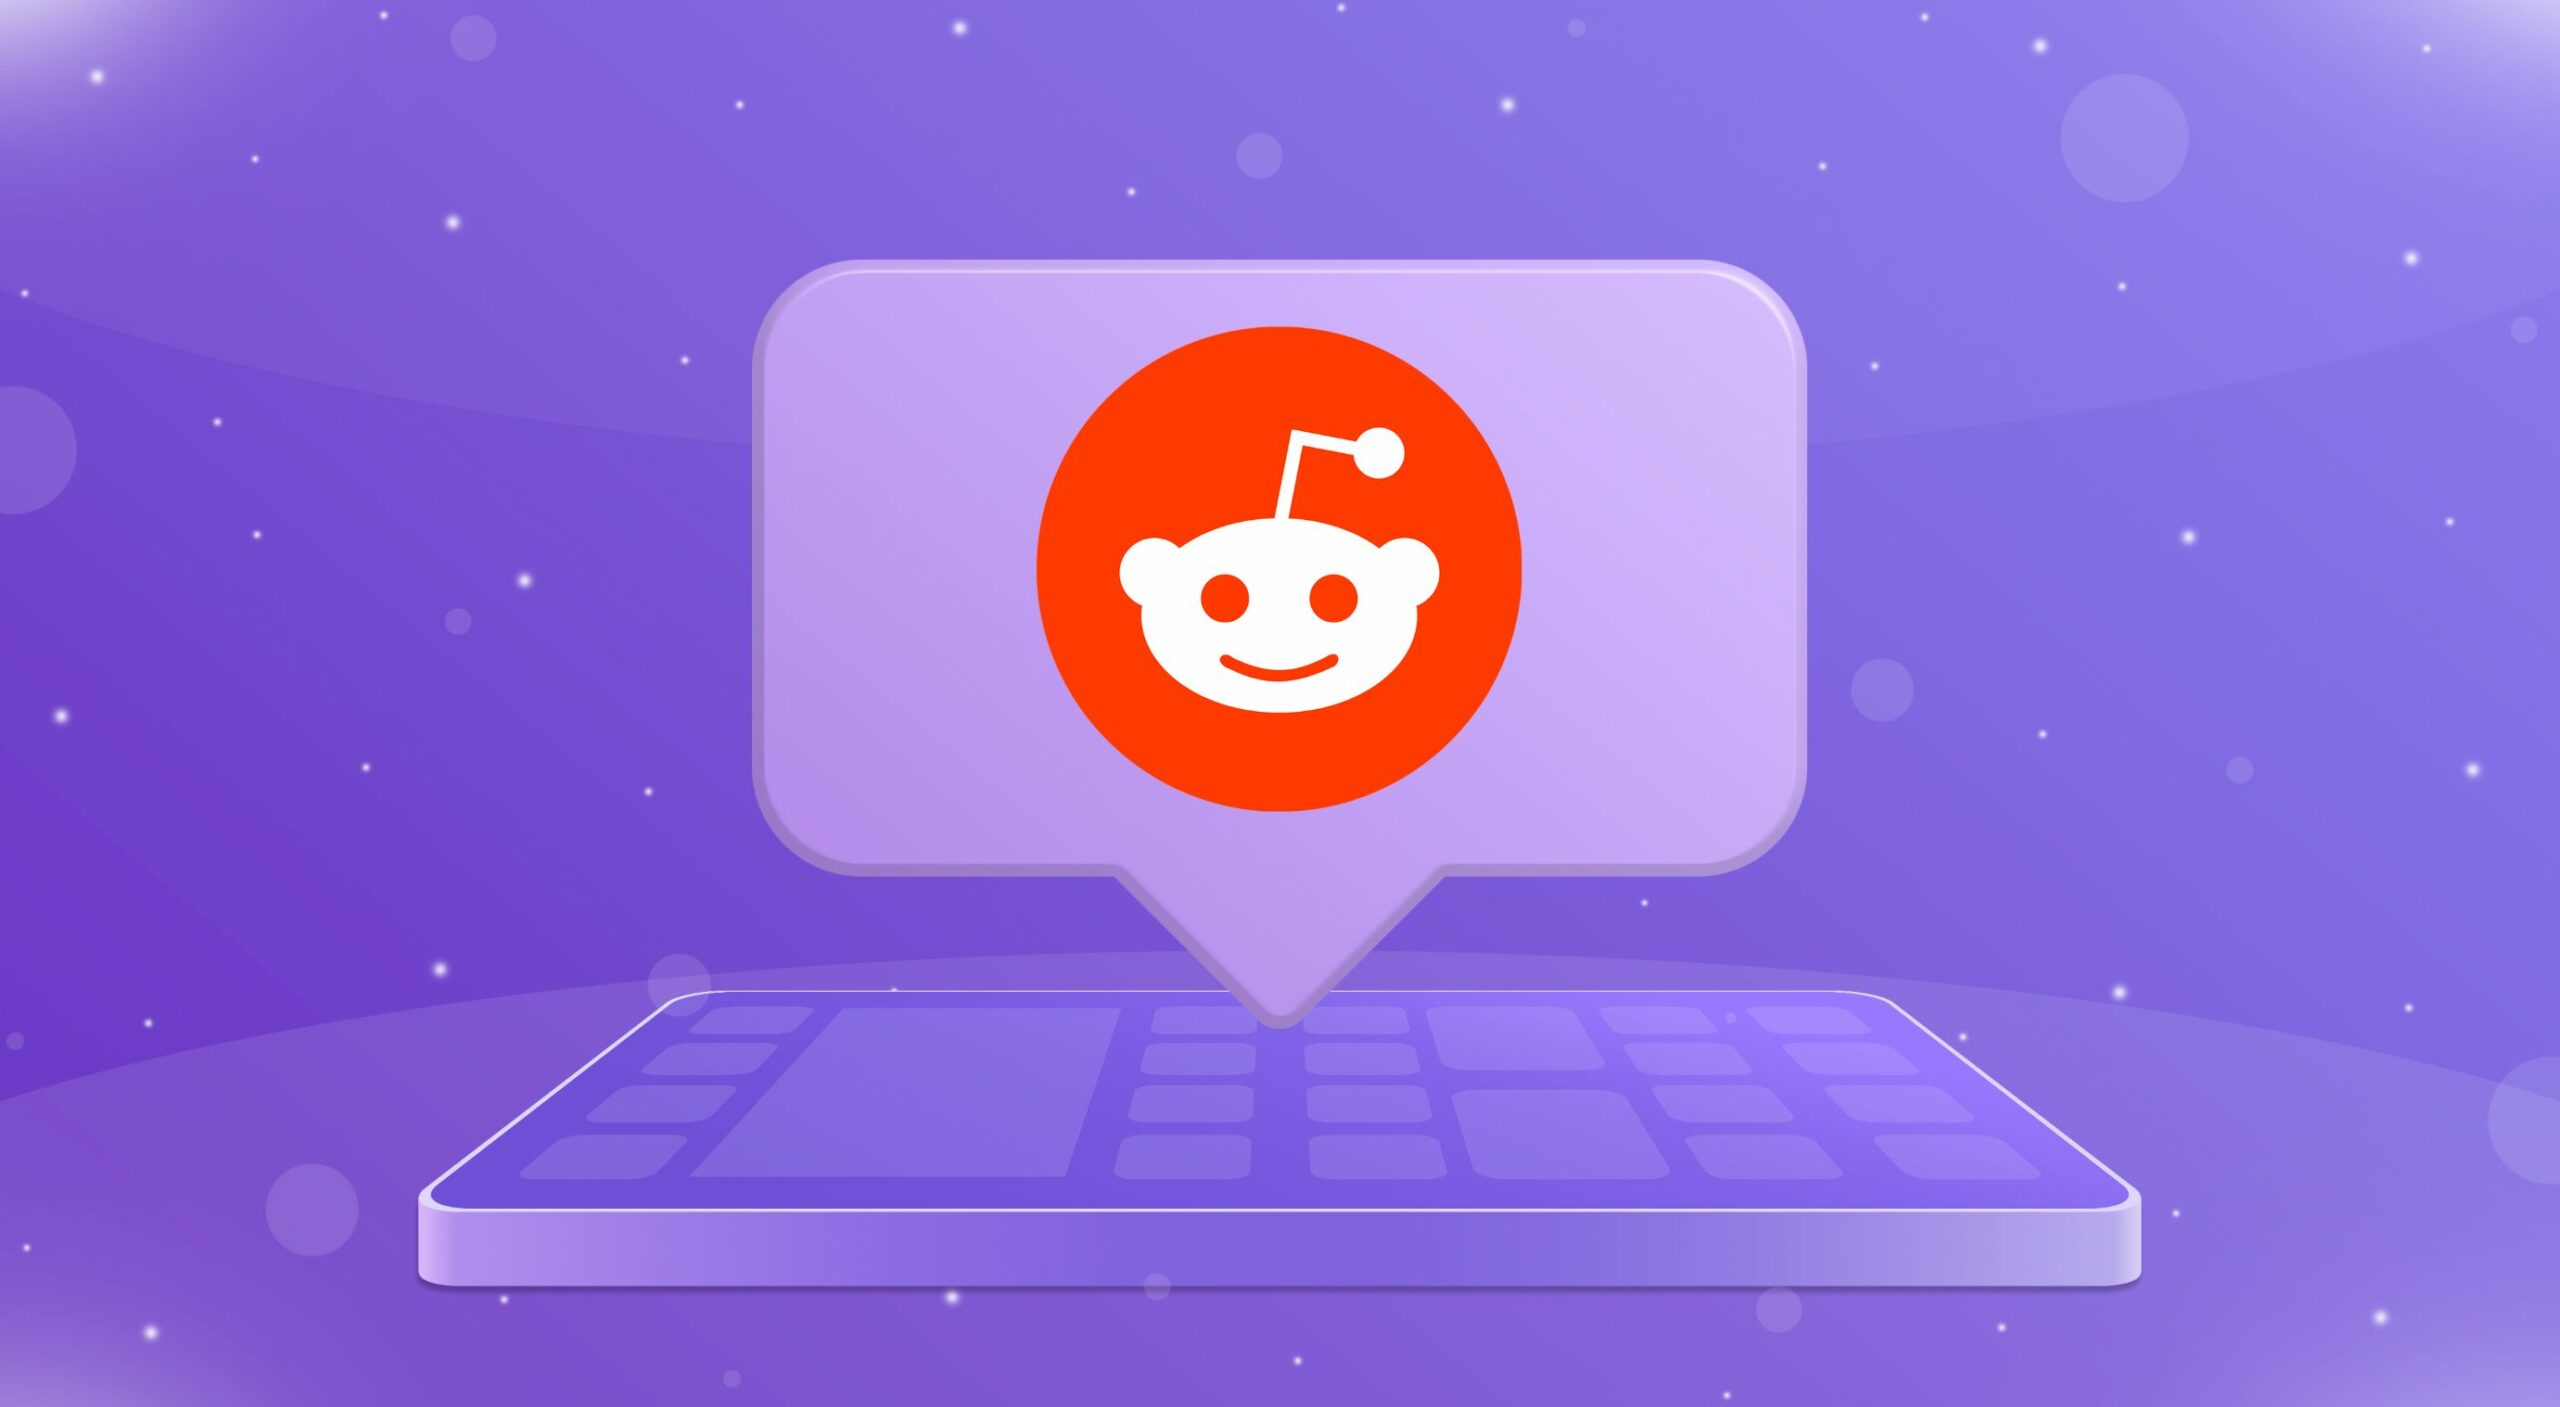 Speech bubble with Reddit logo icon in it, over 3D smartphone laying flat